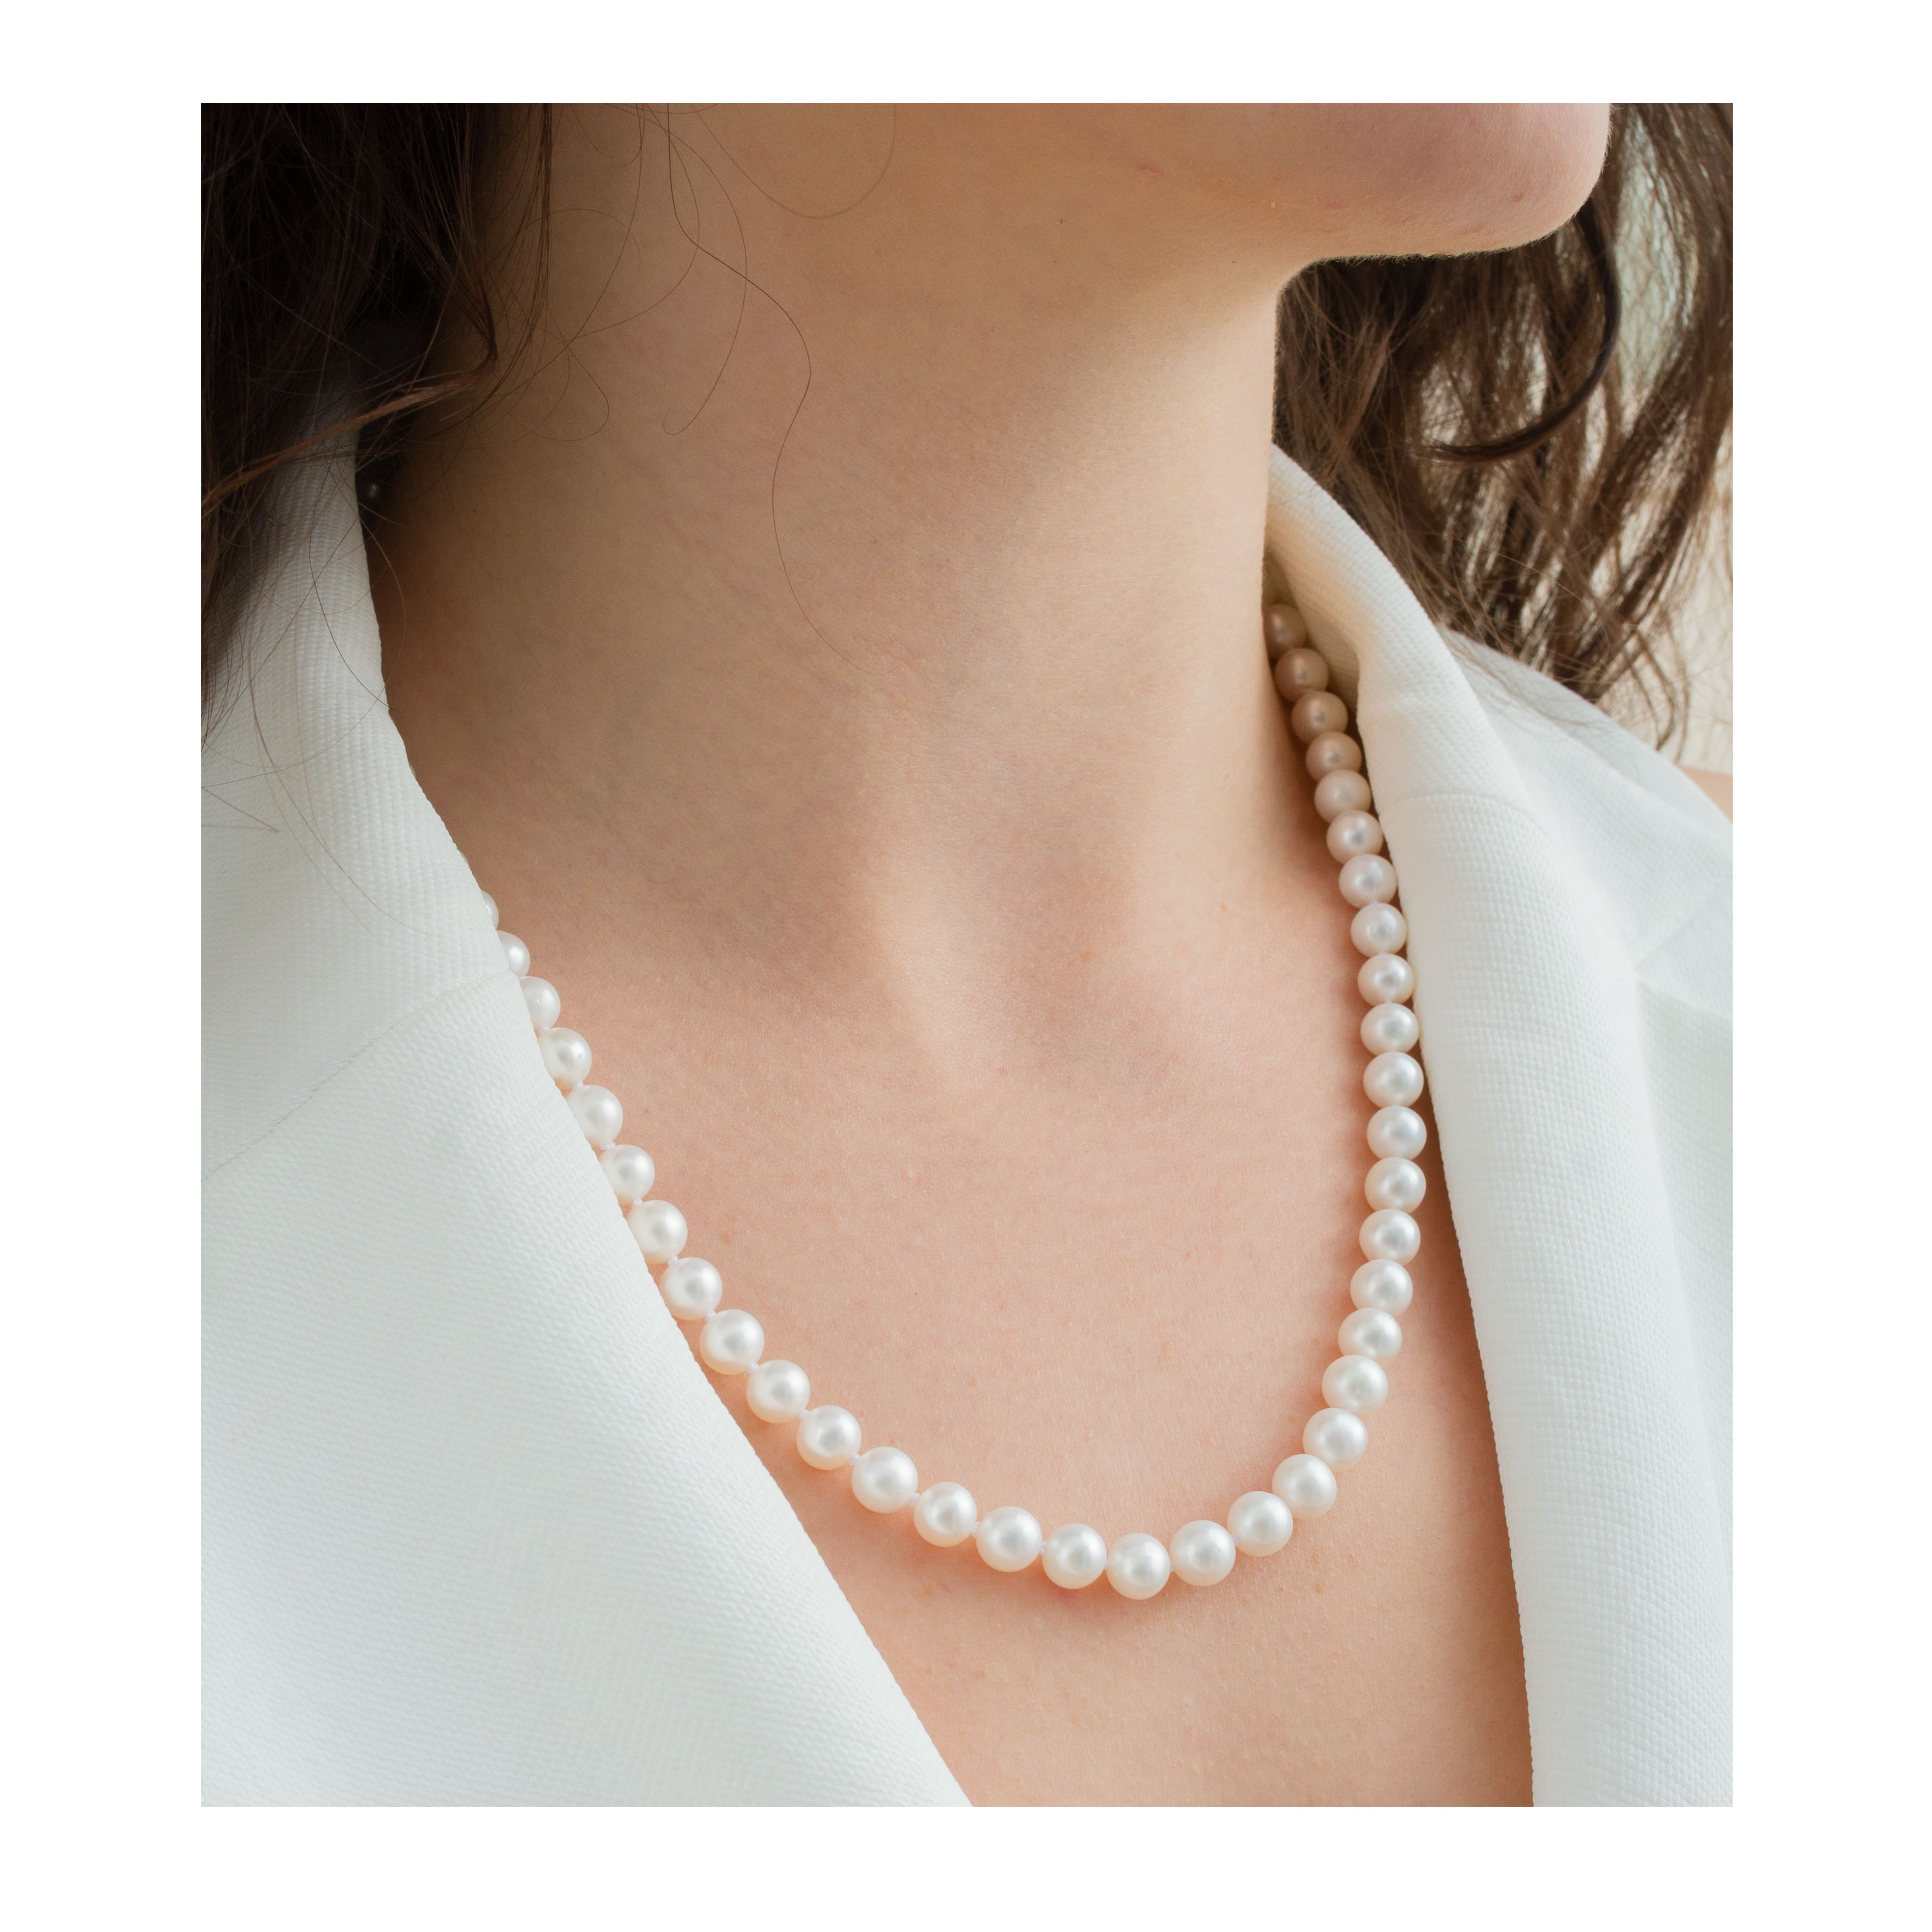 7mm-8mm White Freshwater Pearl Necklace